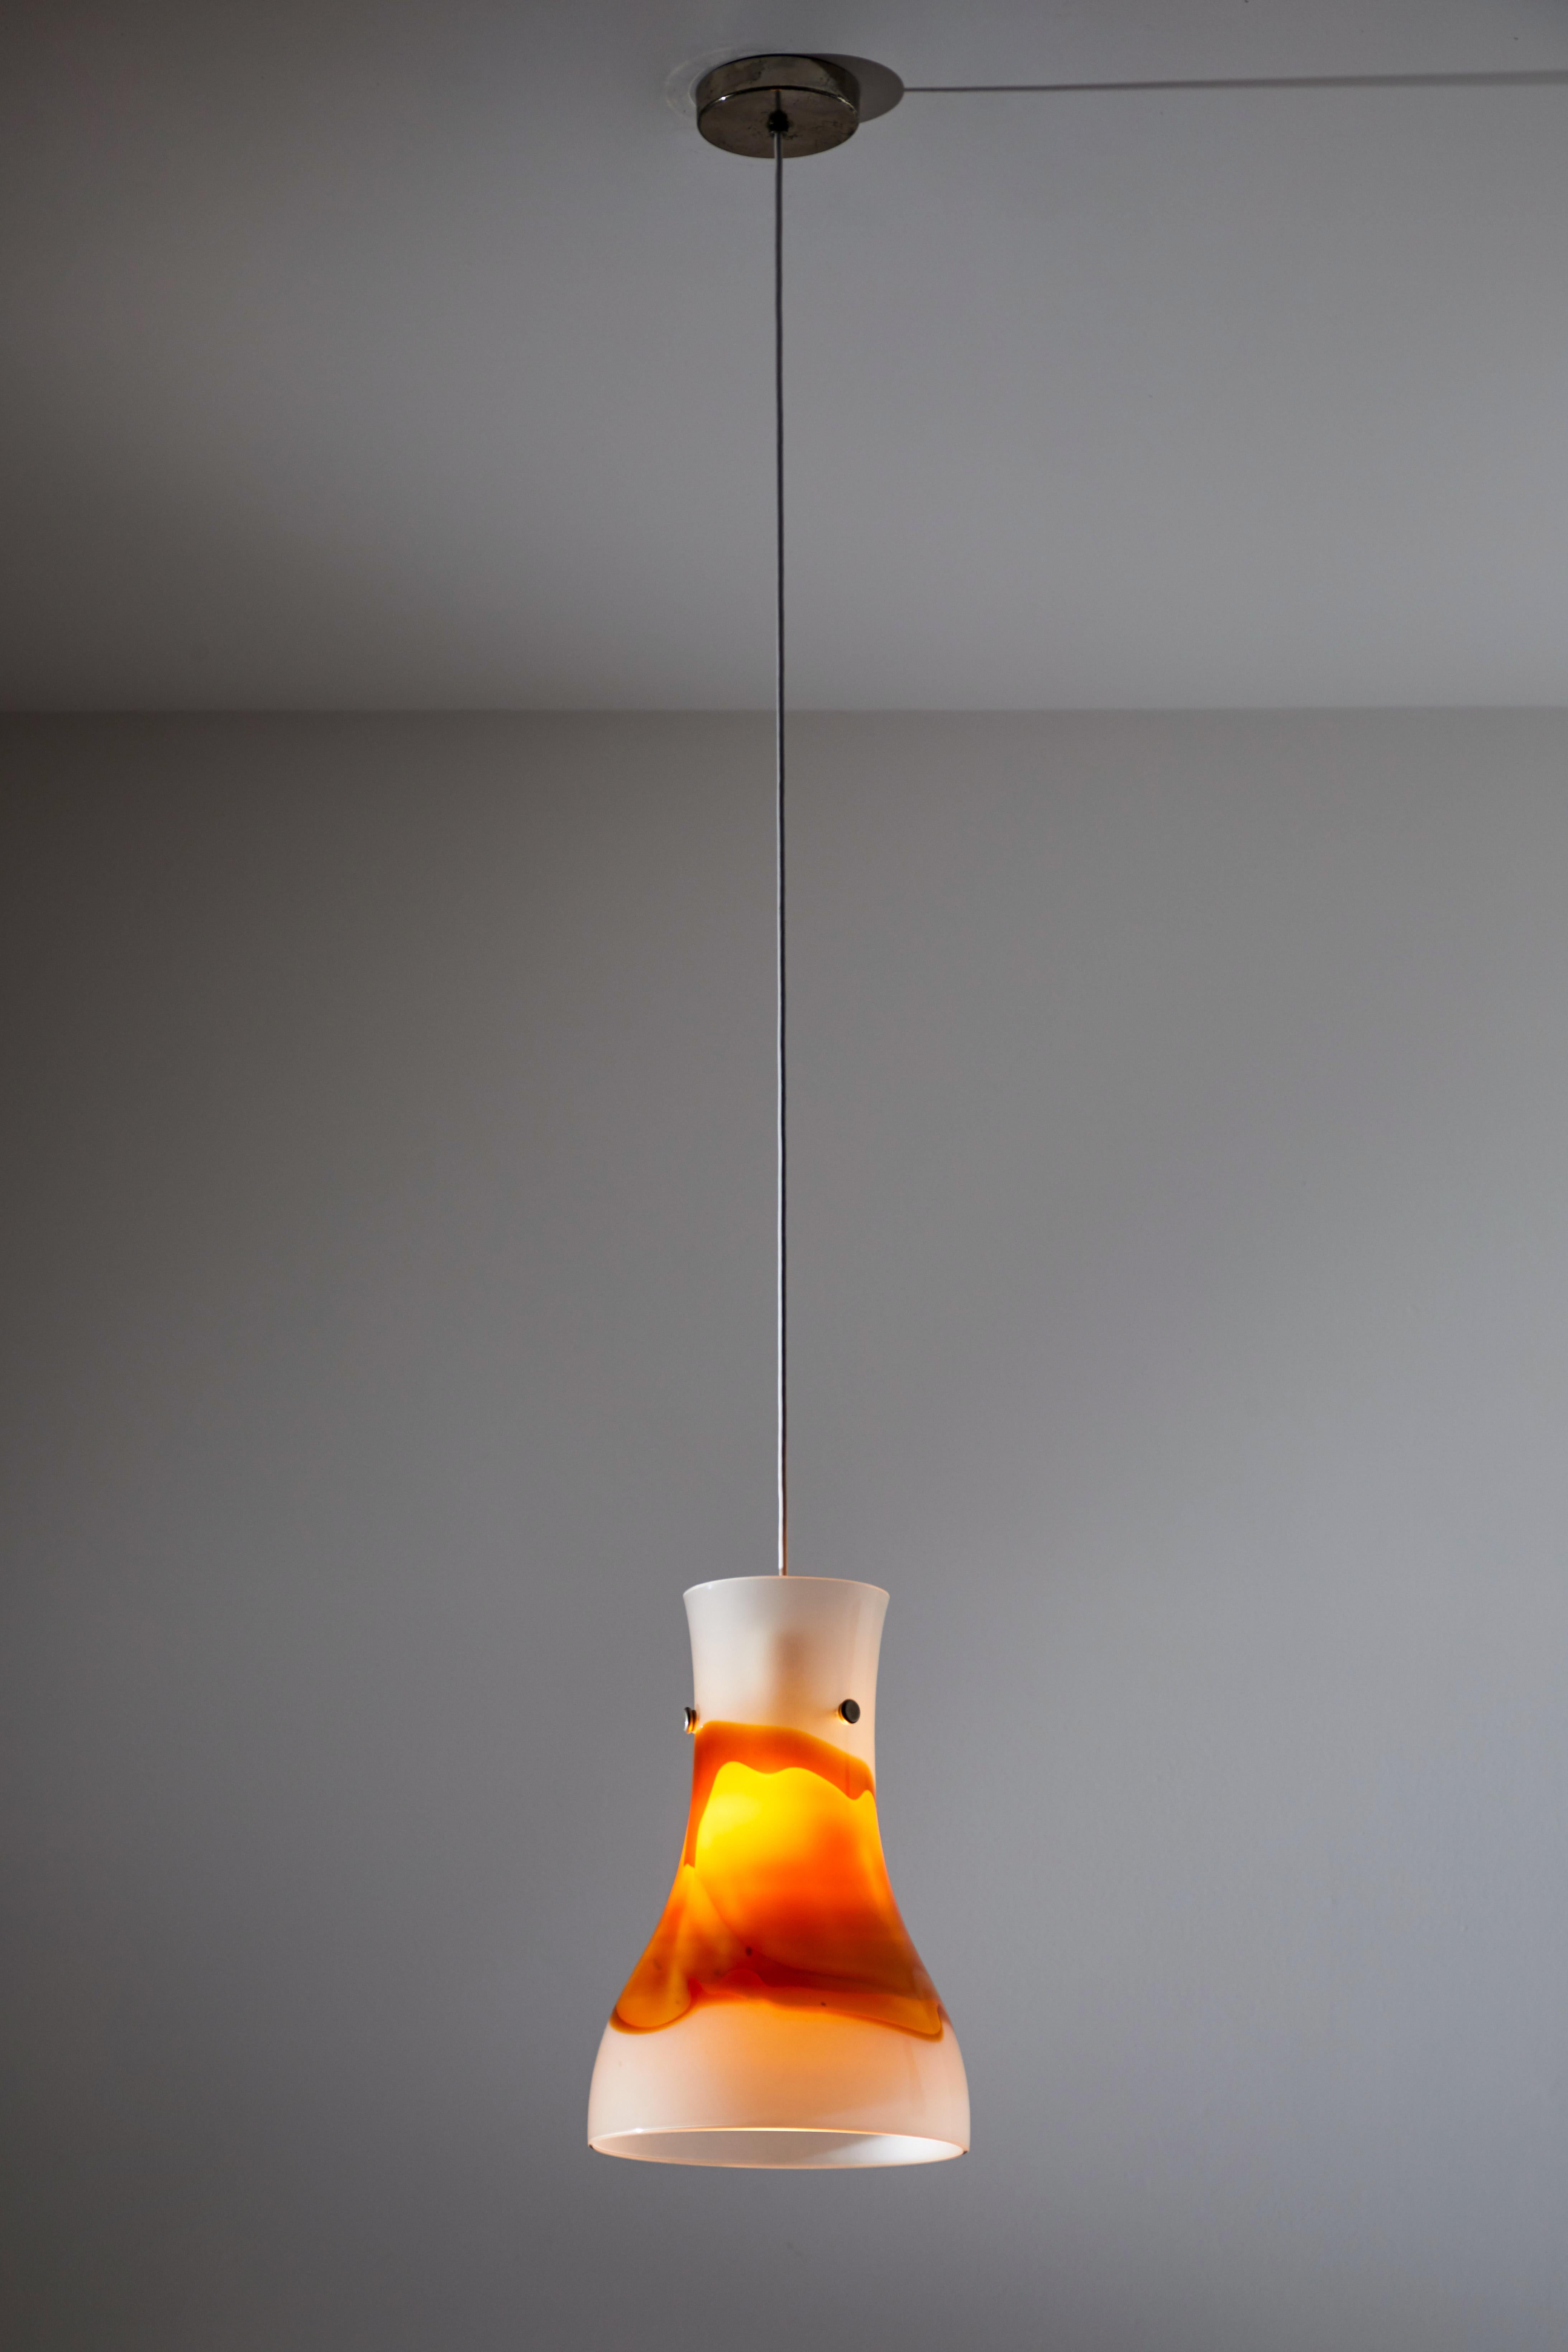 Suspension lights by Tobia Scarpa for Venini. Designed and manufactured in Italy, 1965. Satin glass diffuser with brushed glass incalmo strip and nickel-plated brass hardware. Rewired for U.S. junction boxes. Each light takes one E27 100w maximum